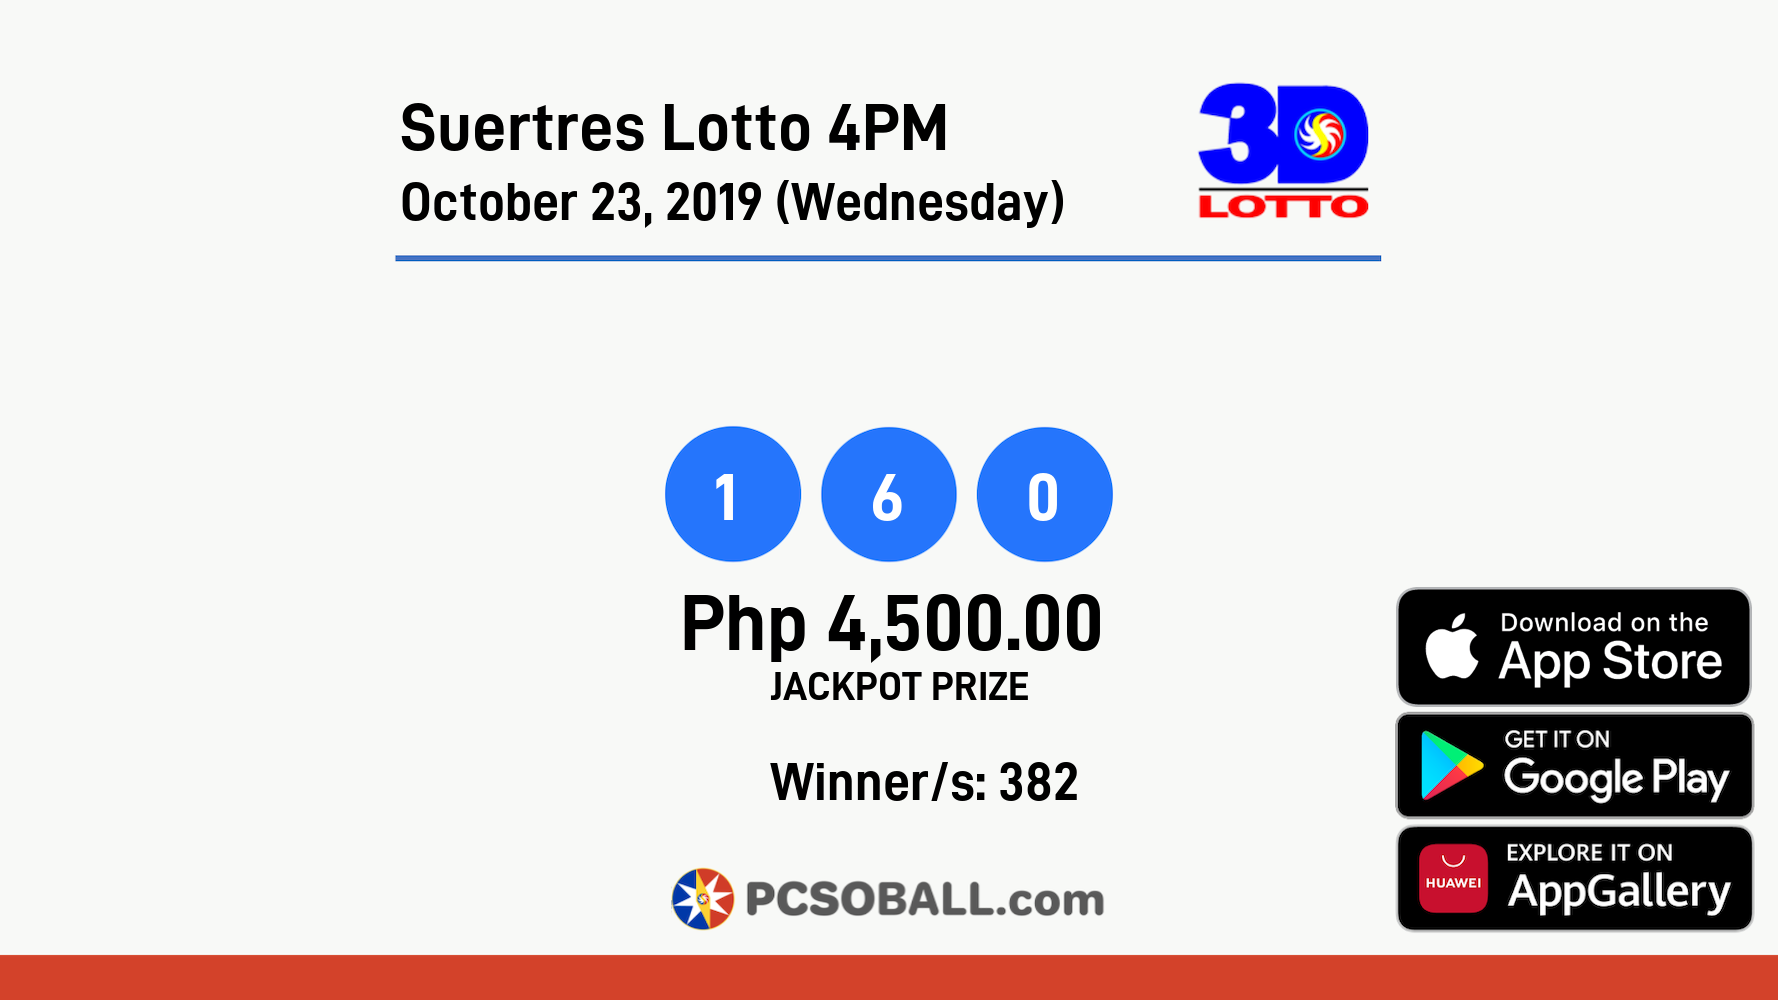 Suertres Lotto 4PM October 23, 2019 (Wednesday) Result